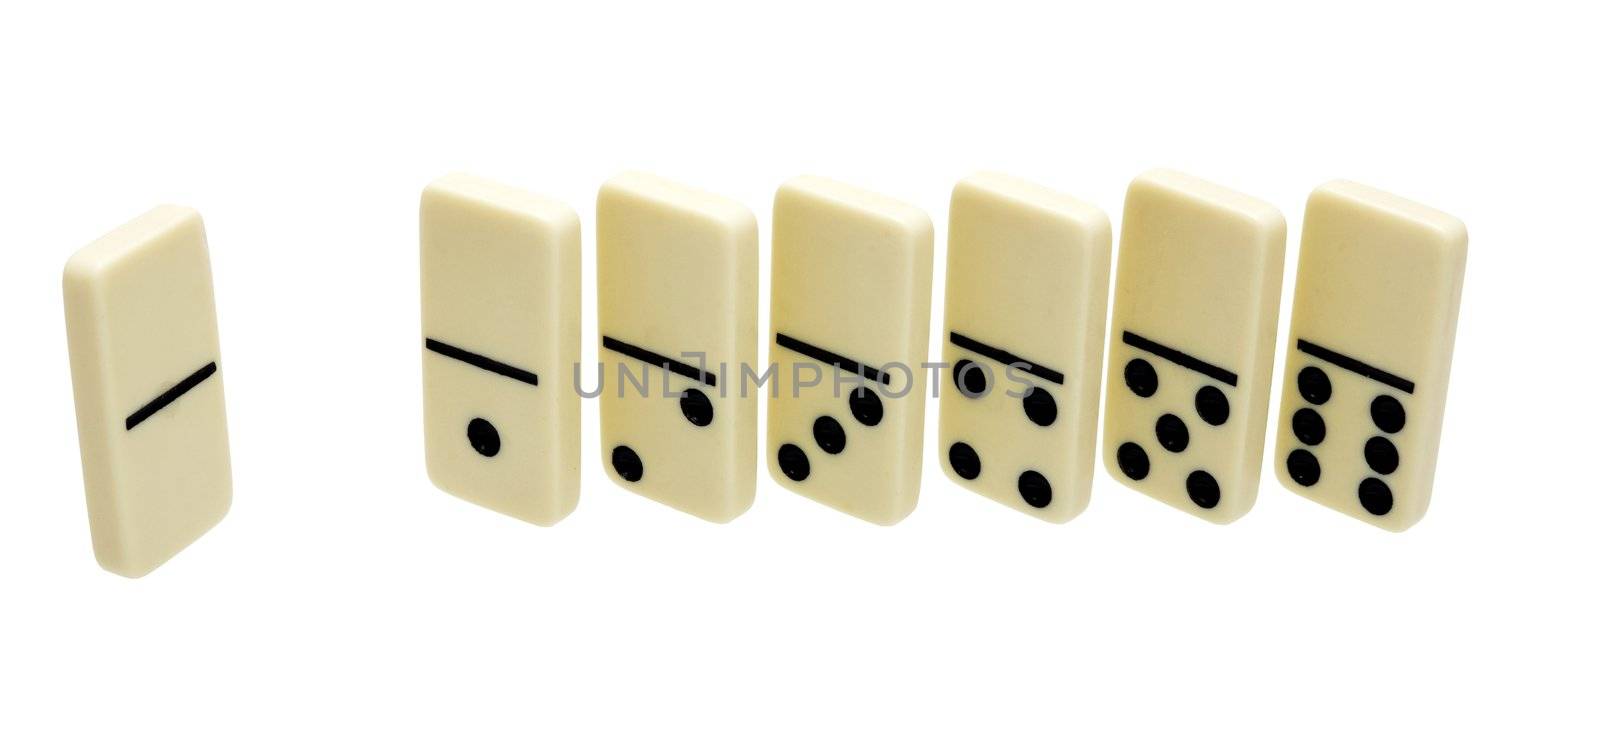 seven domino's standing dice on a white background